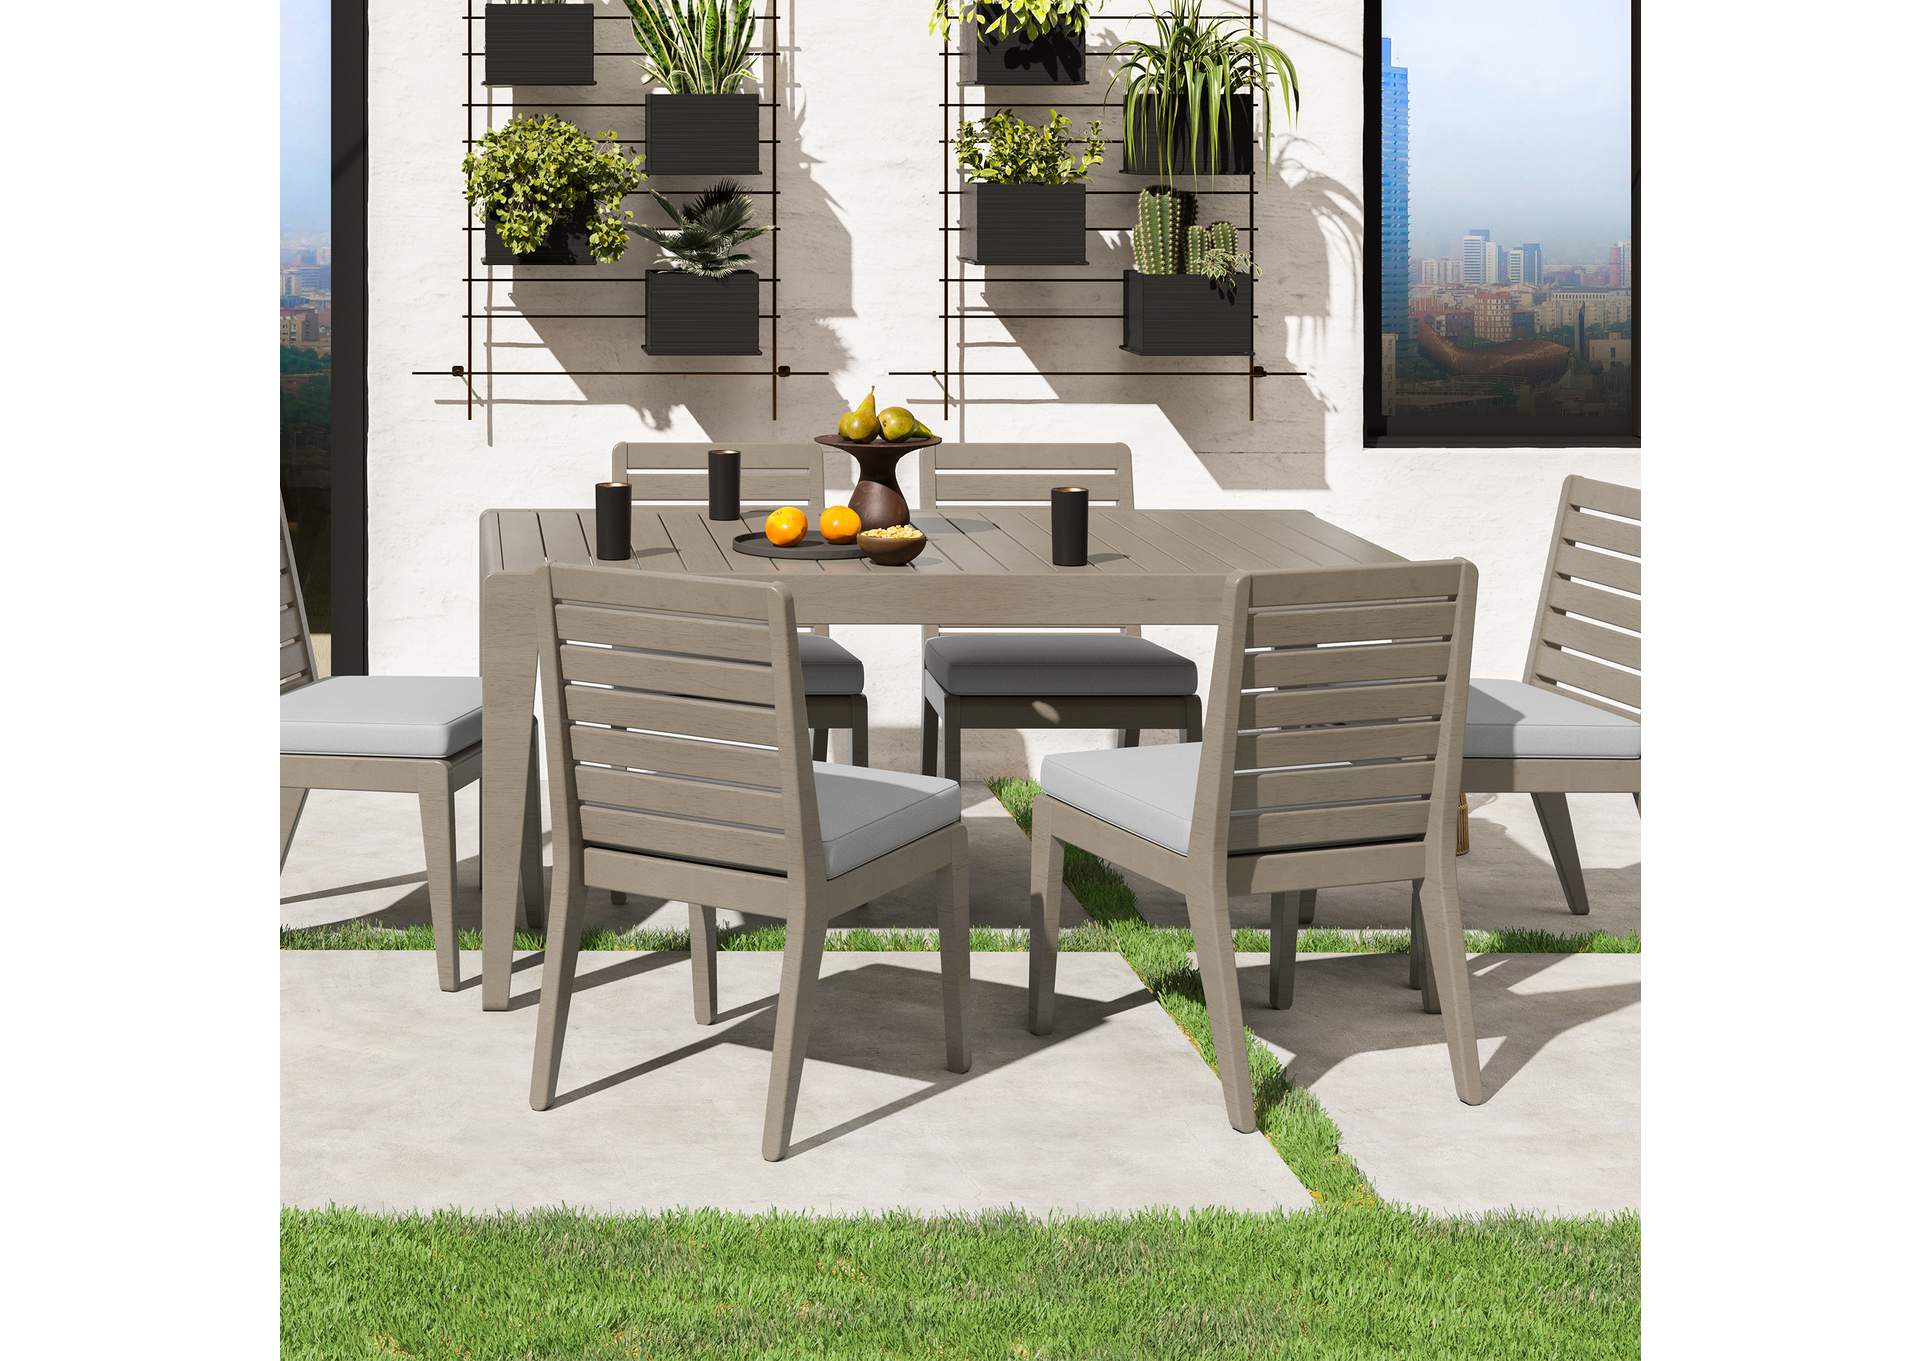 Sustain Outdoor Dining Table By Homestyles,Homestyles